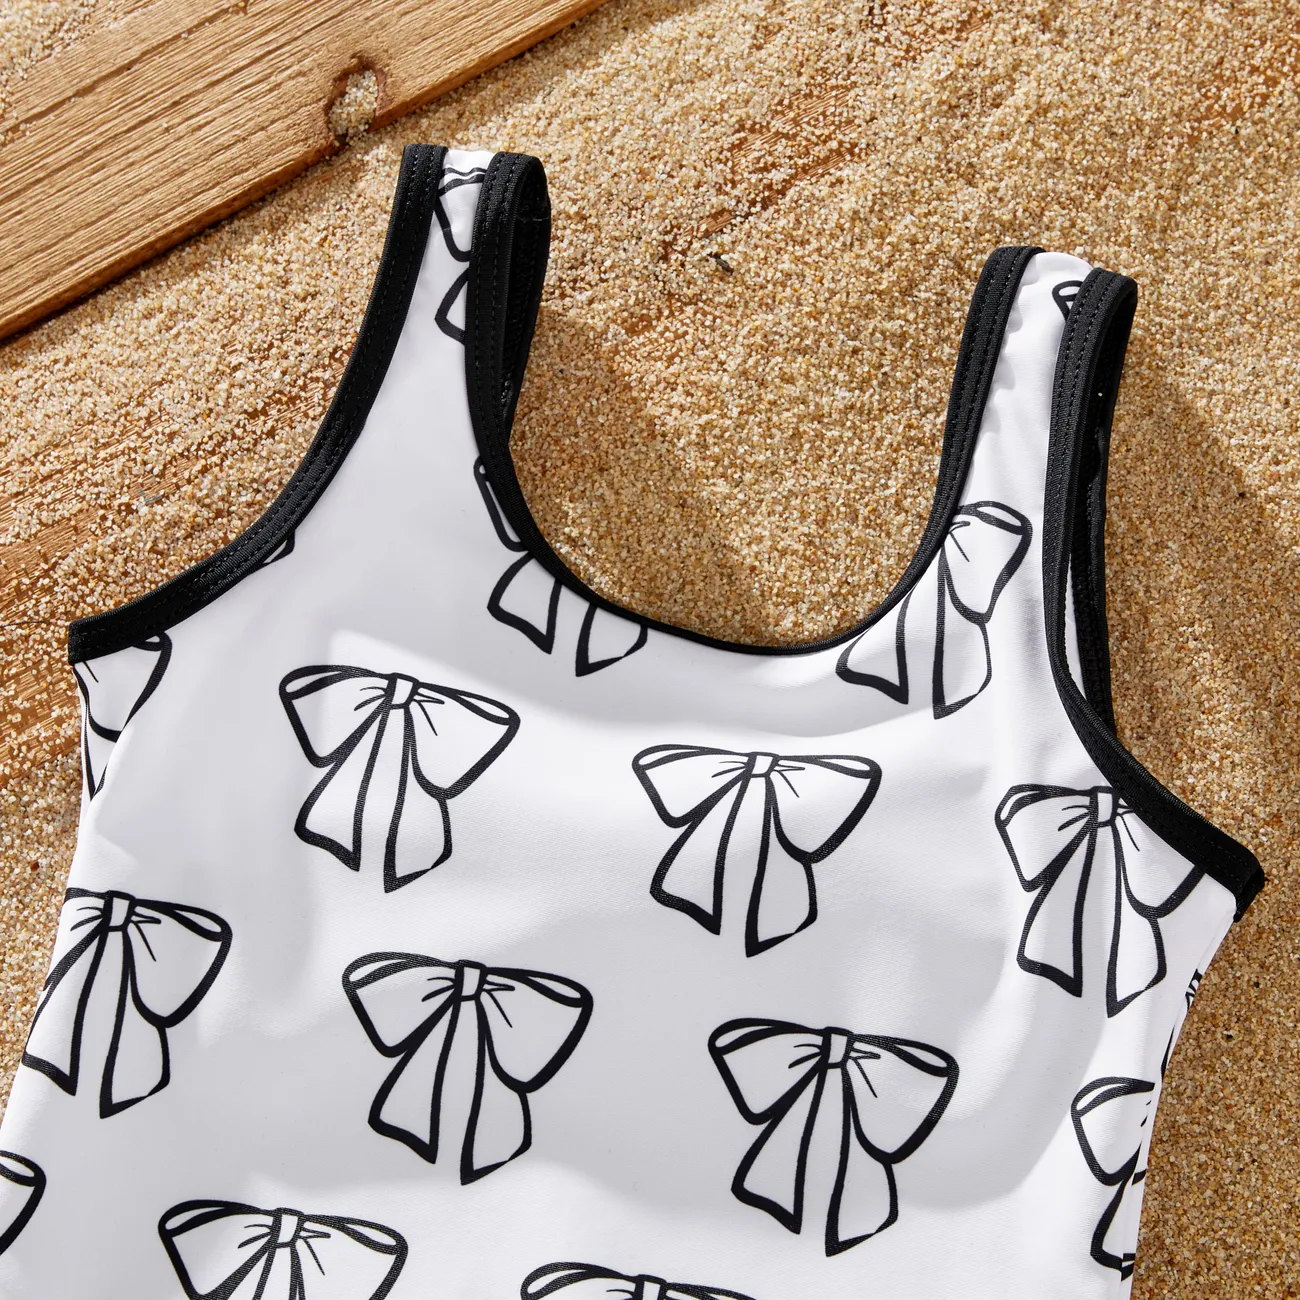 Family Matching Letter Printed Drawstring Swim Trunks or Bow Pattern Strap Swimsuit White big image 1